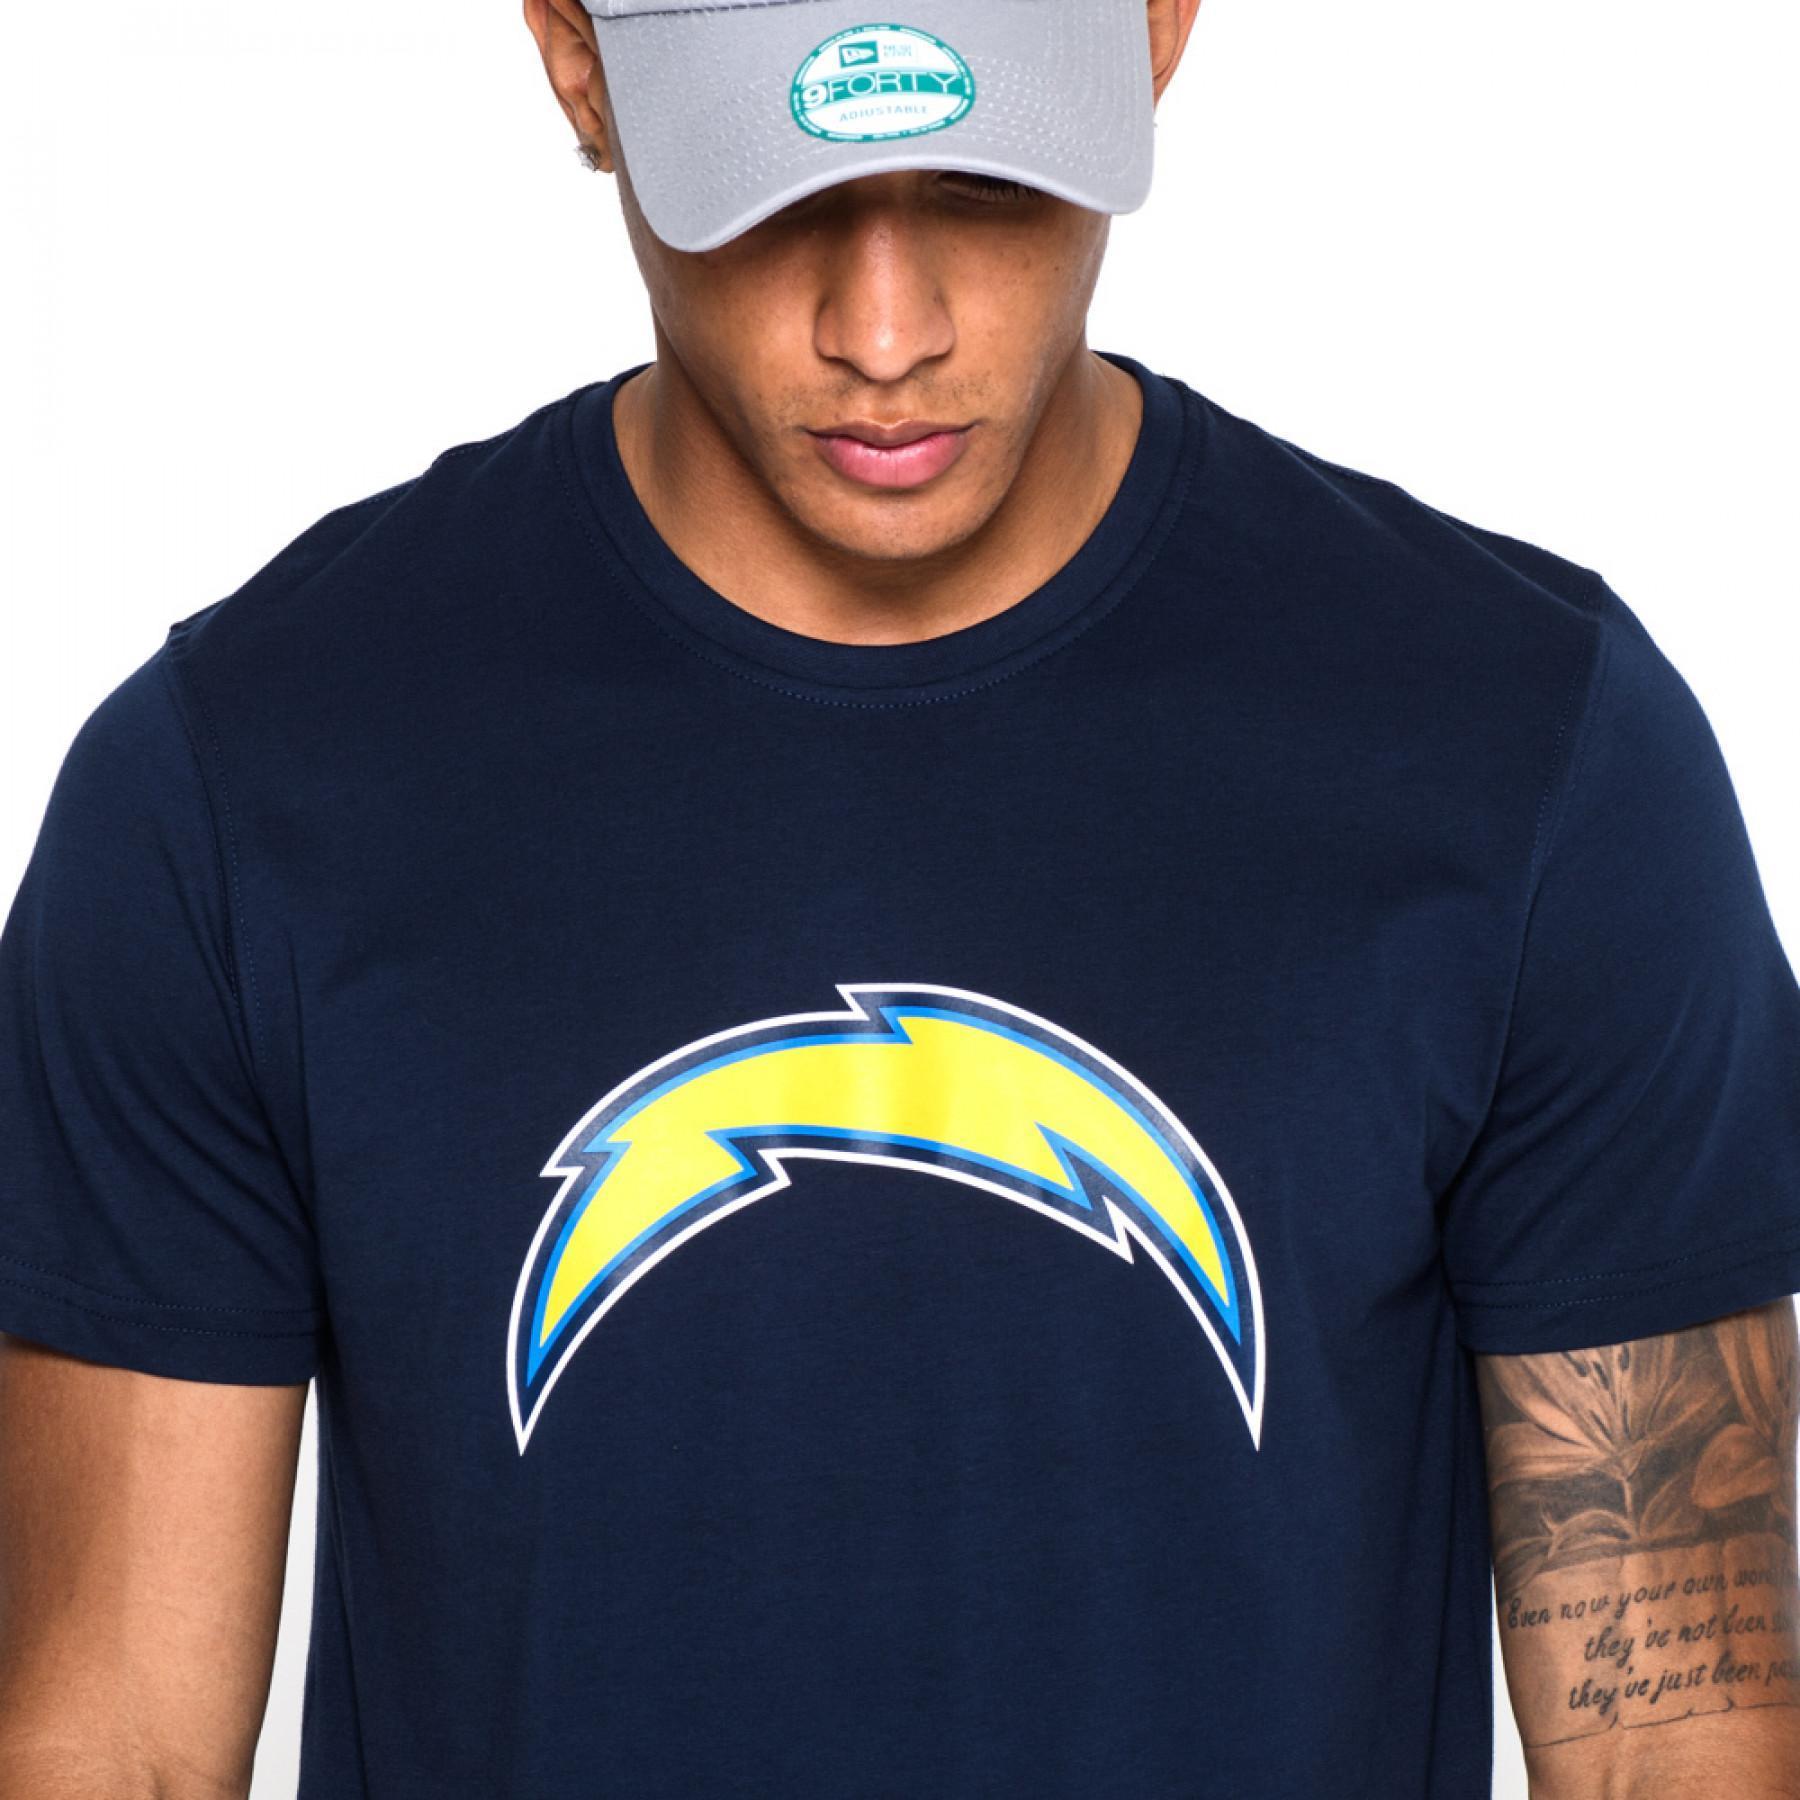  New EraT - s h i r t   logo San Diego Chargers